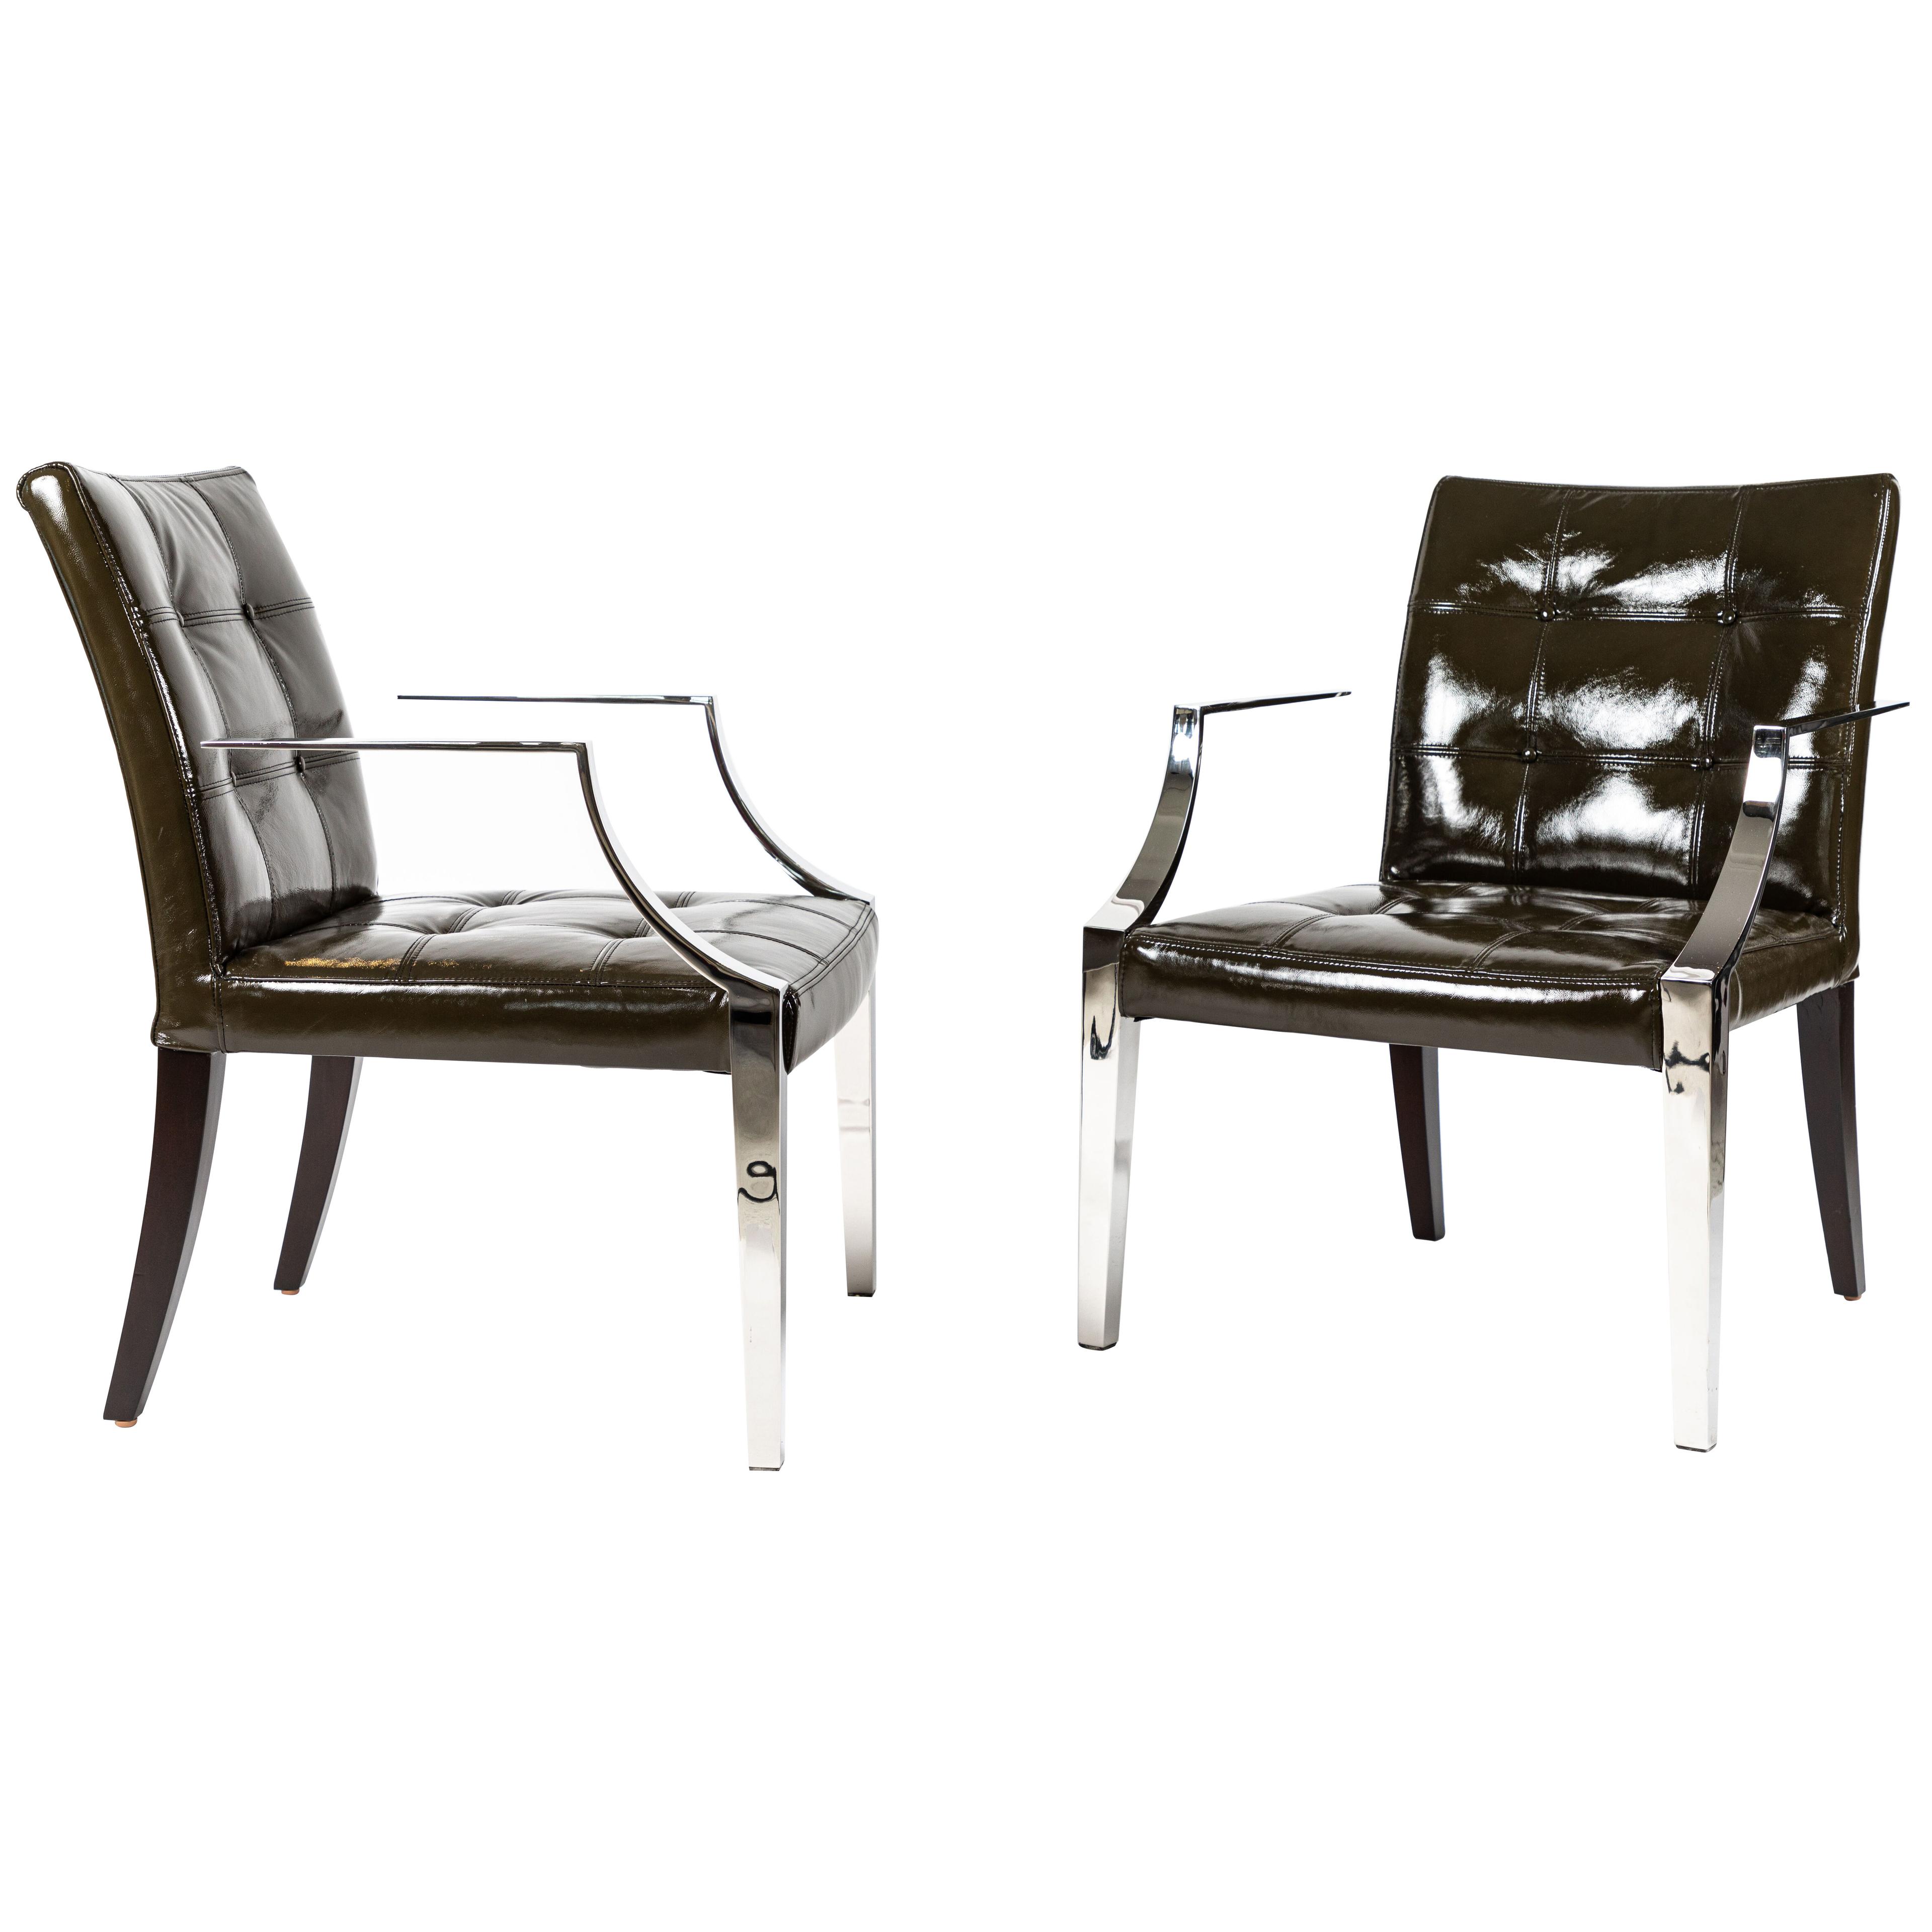 A Pair of Monseigneur Chairs Designed by Philippe Starck for Driade